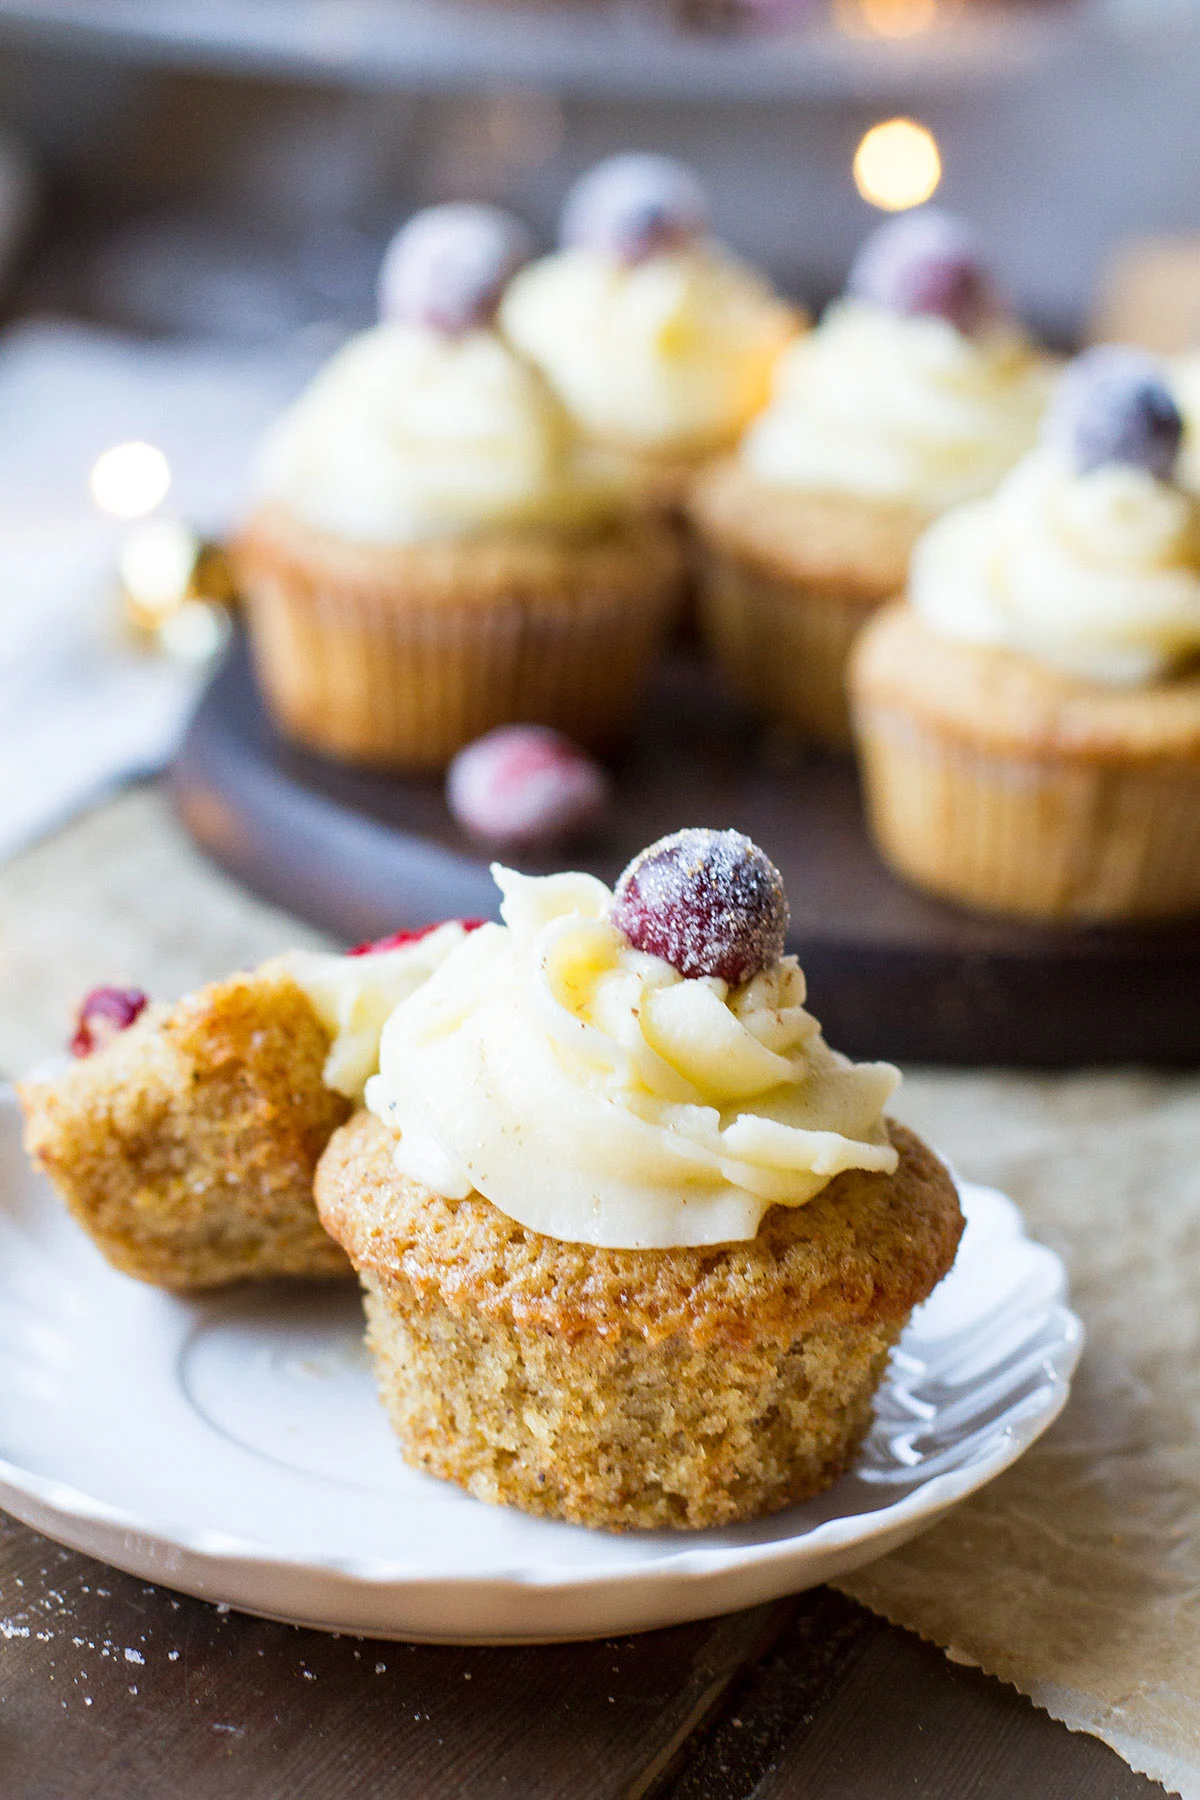 One cupcake with eggnog icing and sugar cranberry on top, out of its muffin liner.